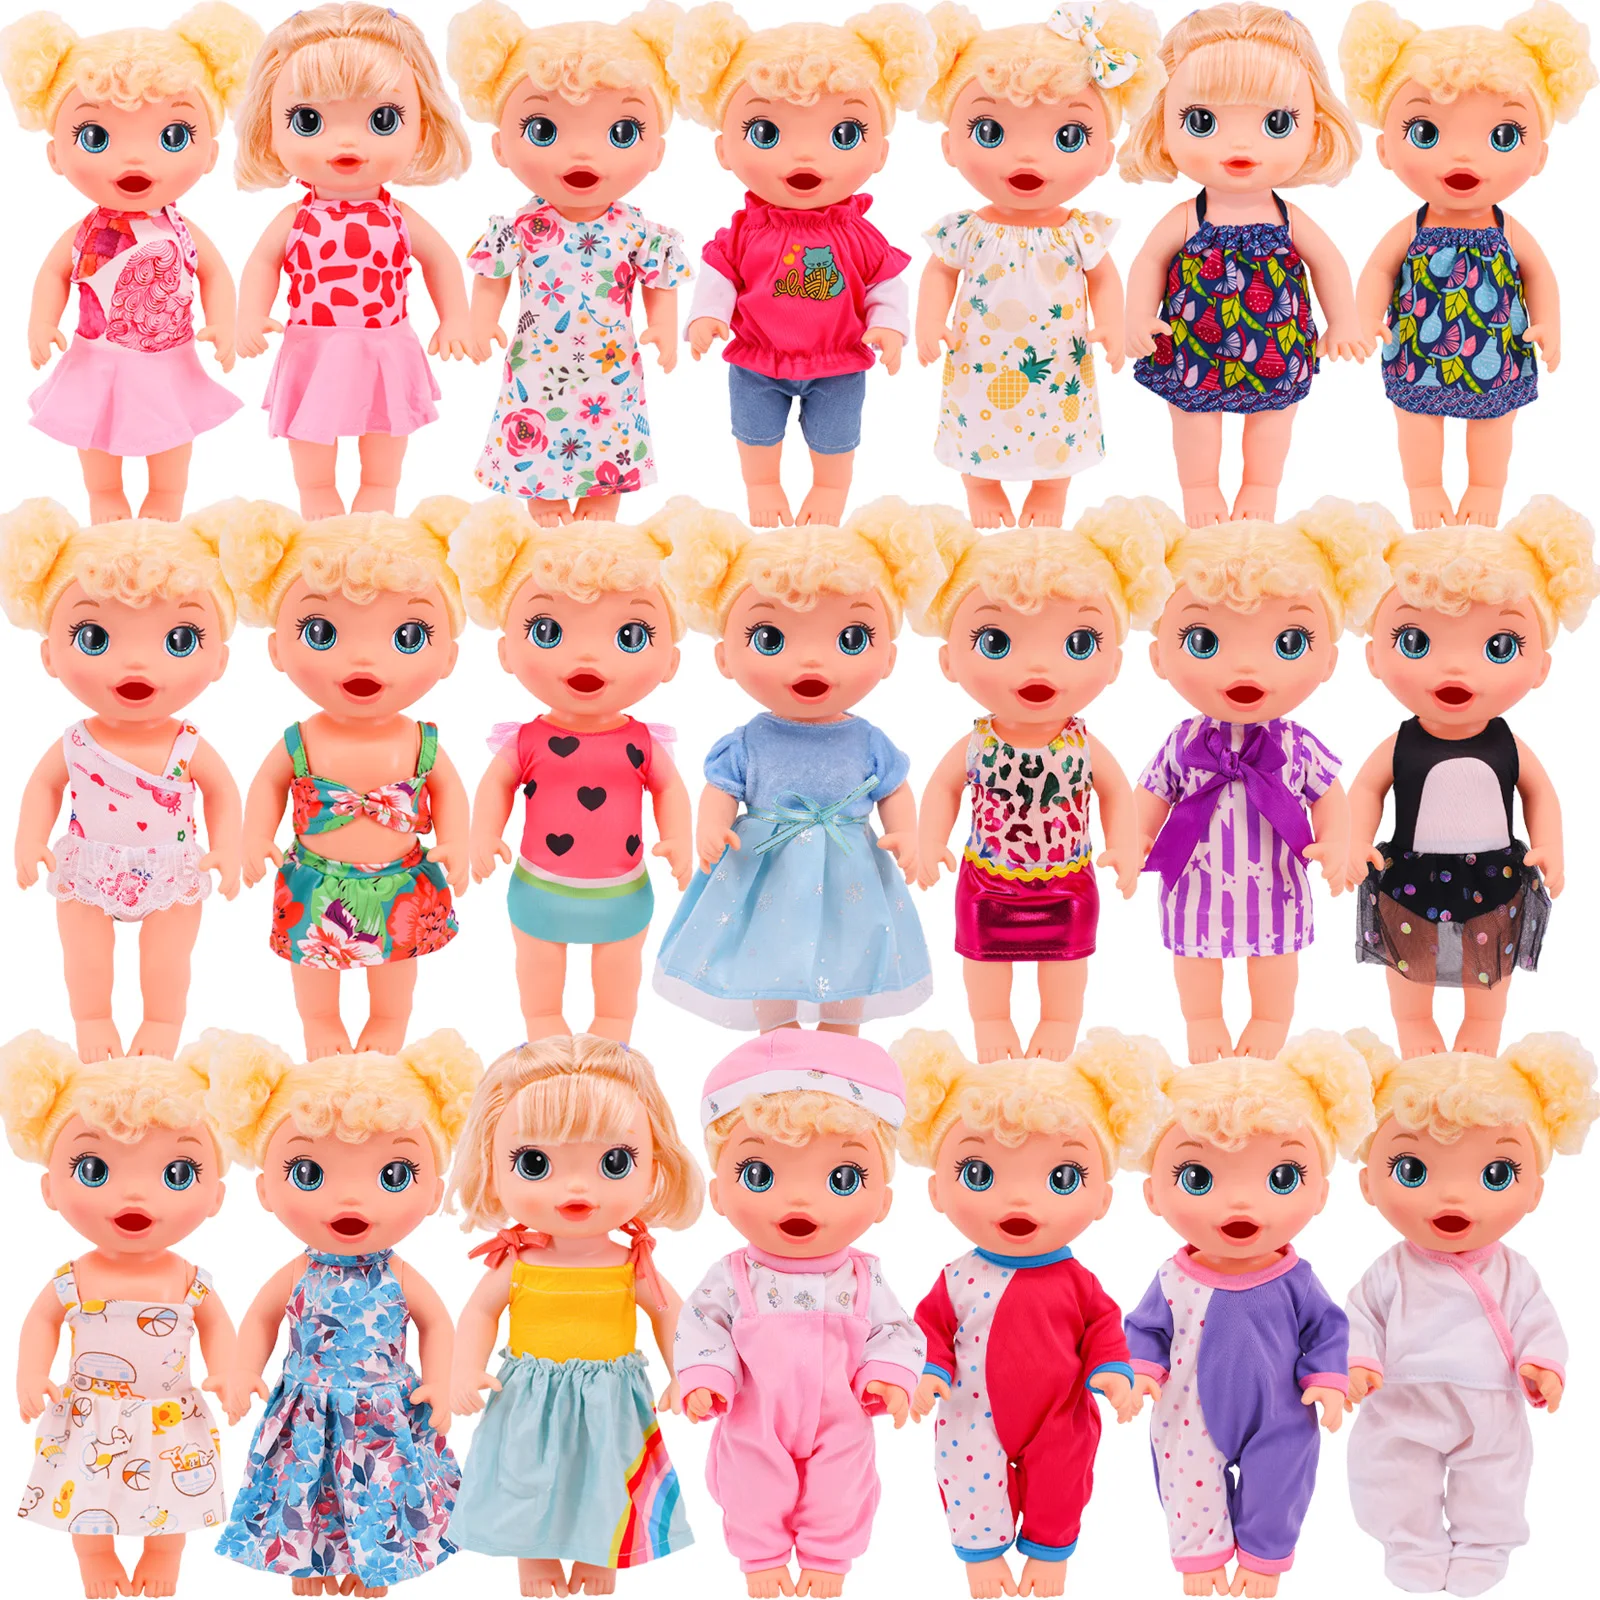 Doll Clothes For 12Inch Alive Baby Doll Print Cute Suspenders Dress&Siamese Suit Various Styles Clothes Accessories,Only Clothes